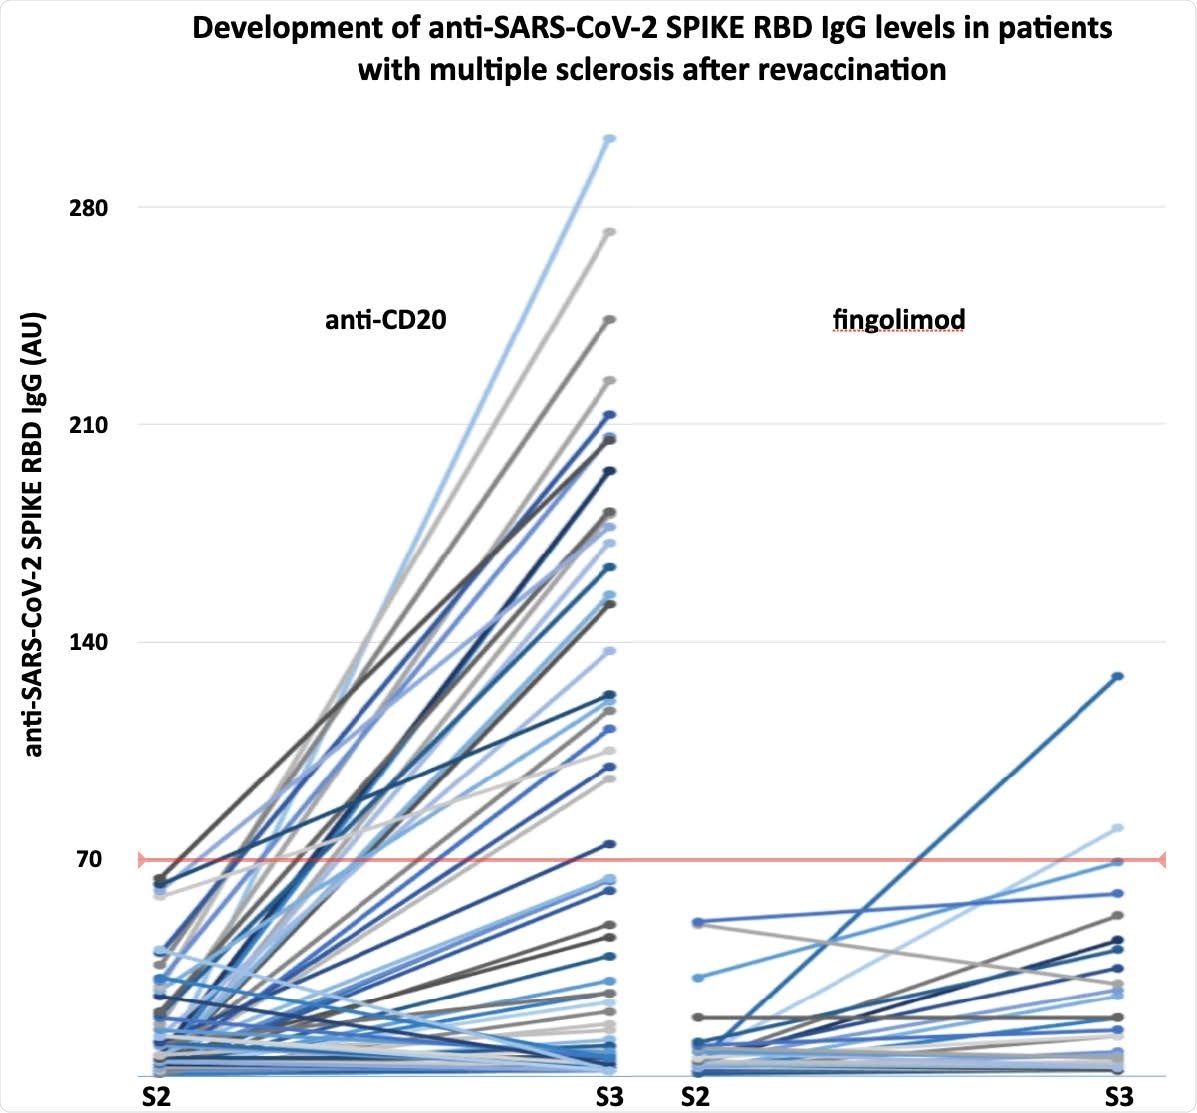 The development of anti-SARS-CoV-2 SPIKE RBD IgG levels in anti-CD20 or fingolimod treated patients with multiple sclerosis undergoing revaccination. S2-3, antibody sample after second and third vaccine dose, respectively.